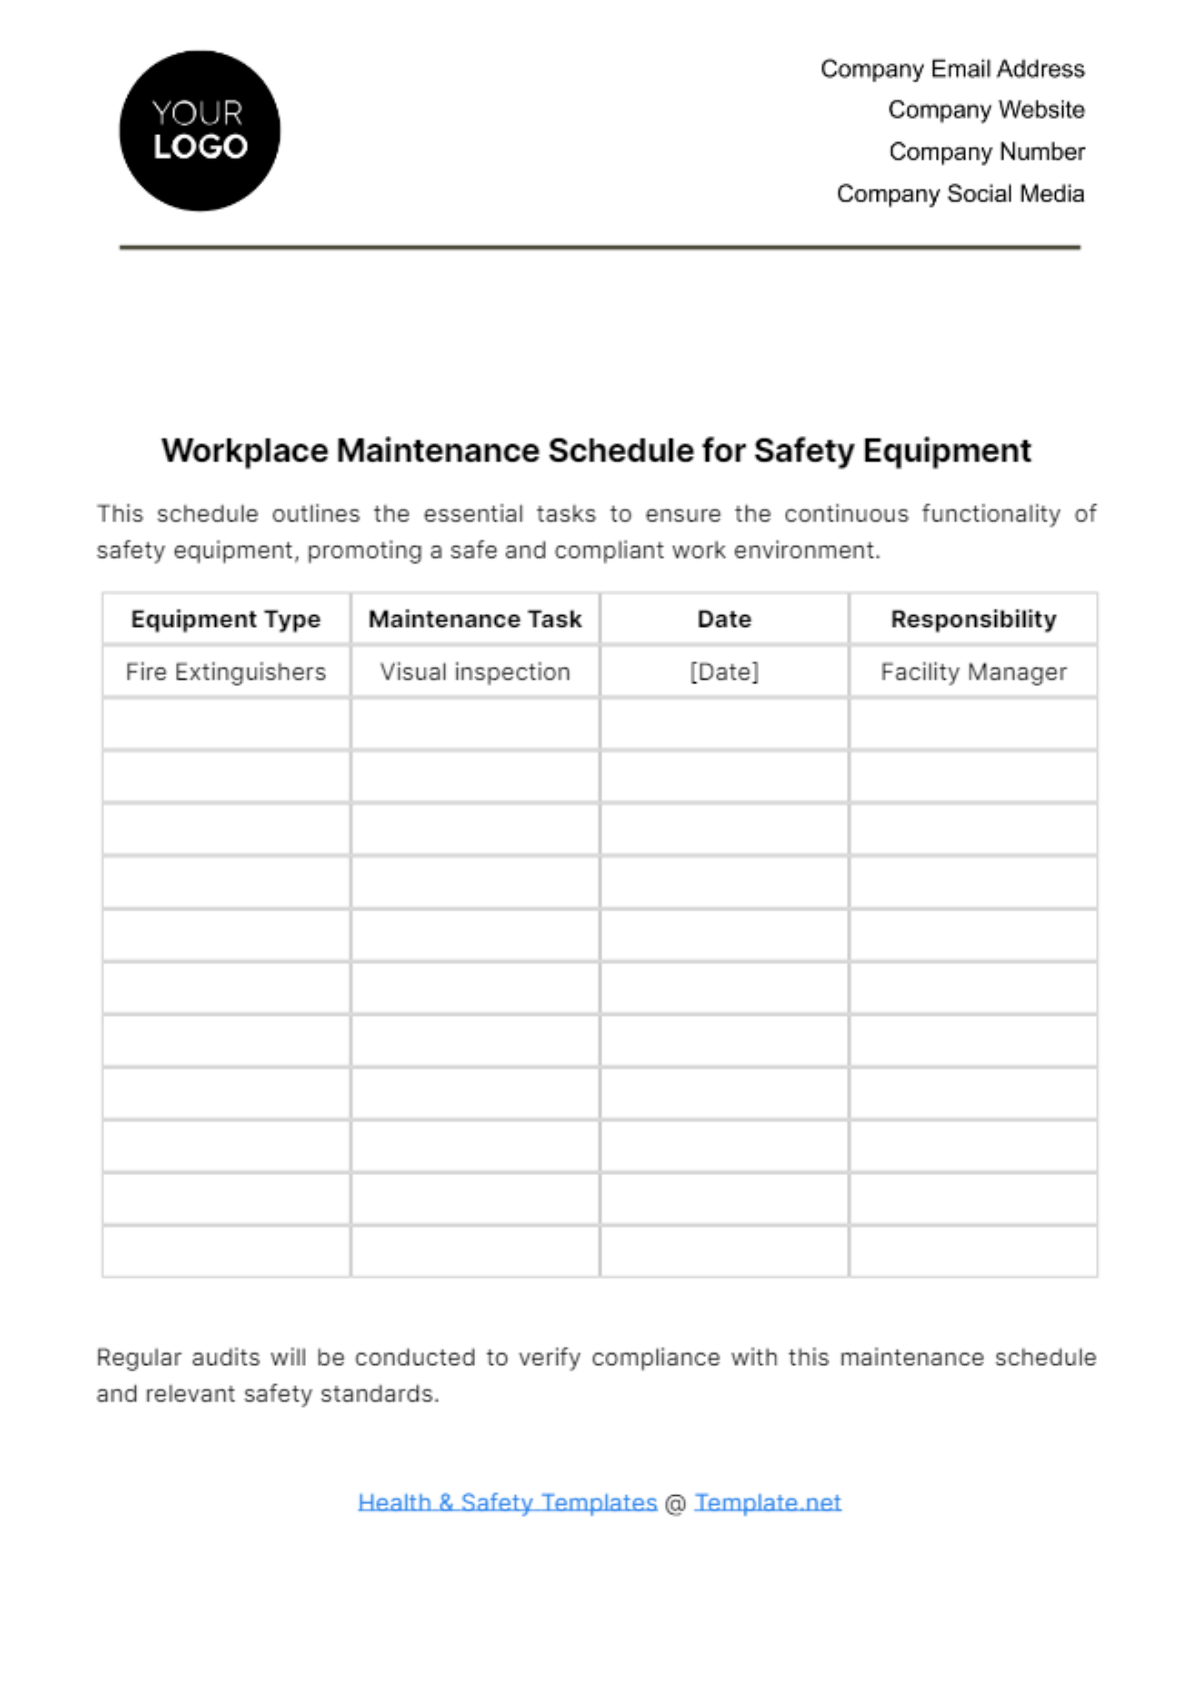 Workplace Maintenance Schedule for Safety Equipment Template